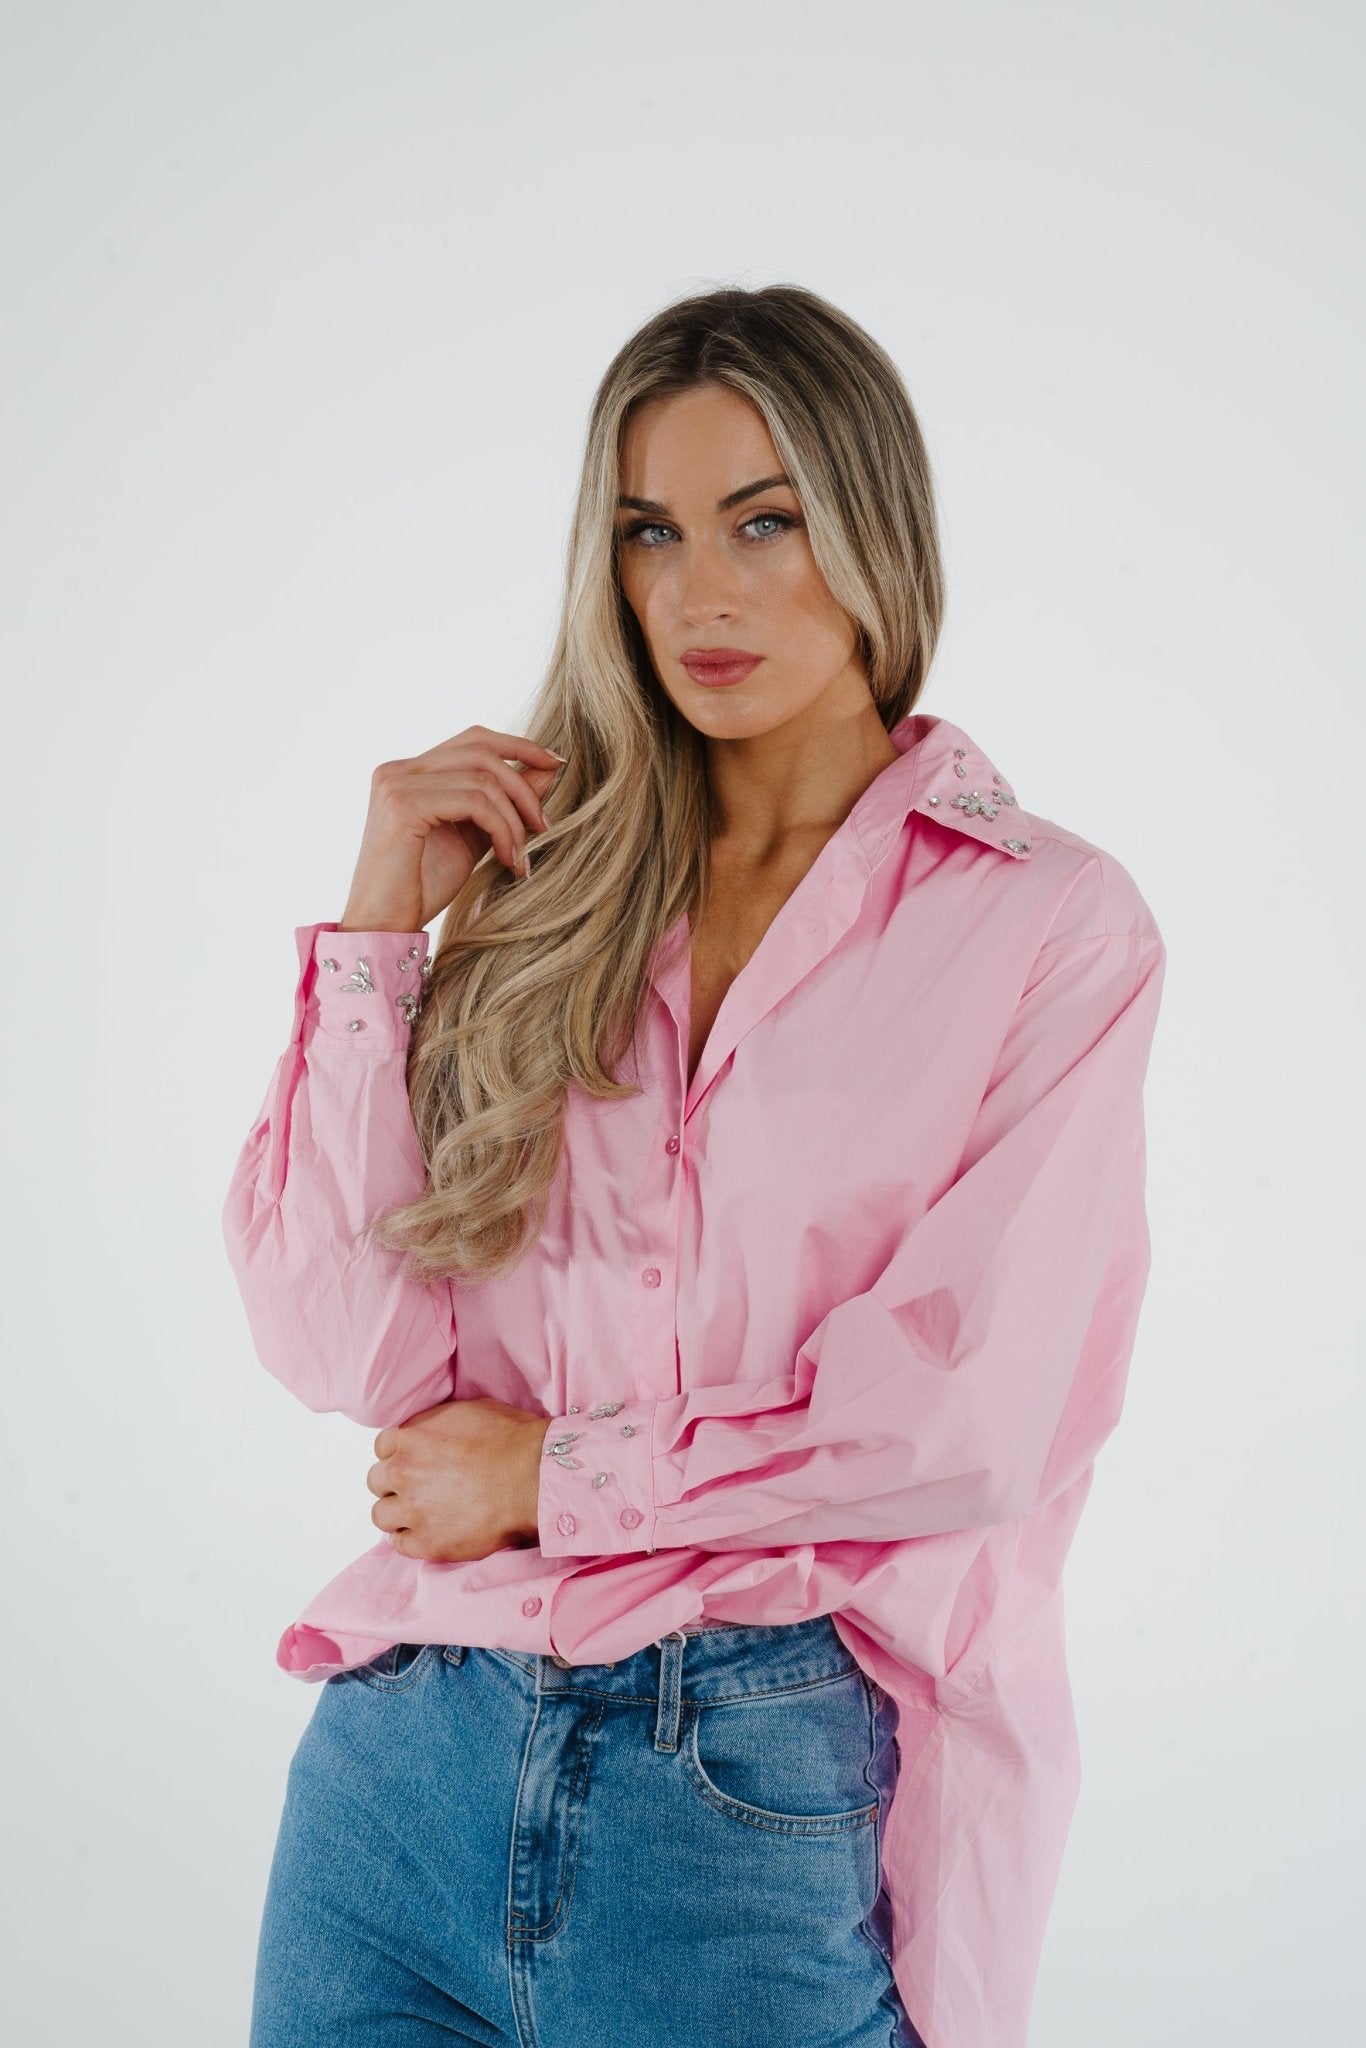 Holly Embellished Shirt In Pink - The Walk in Wardrobe